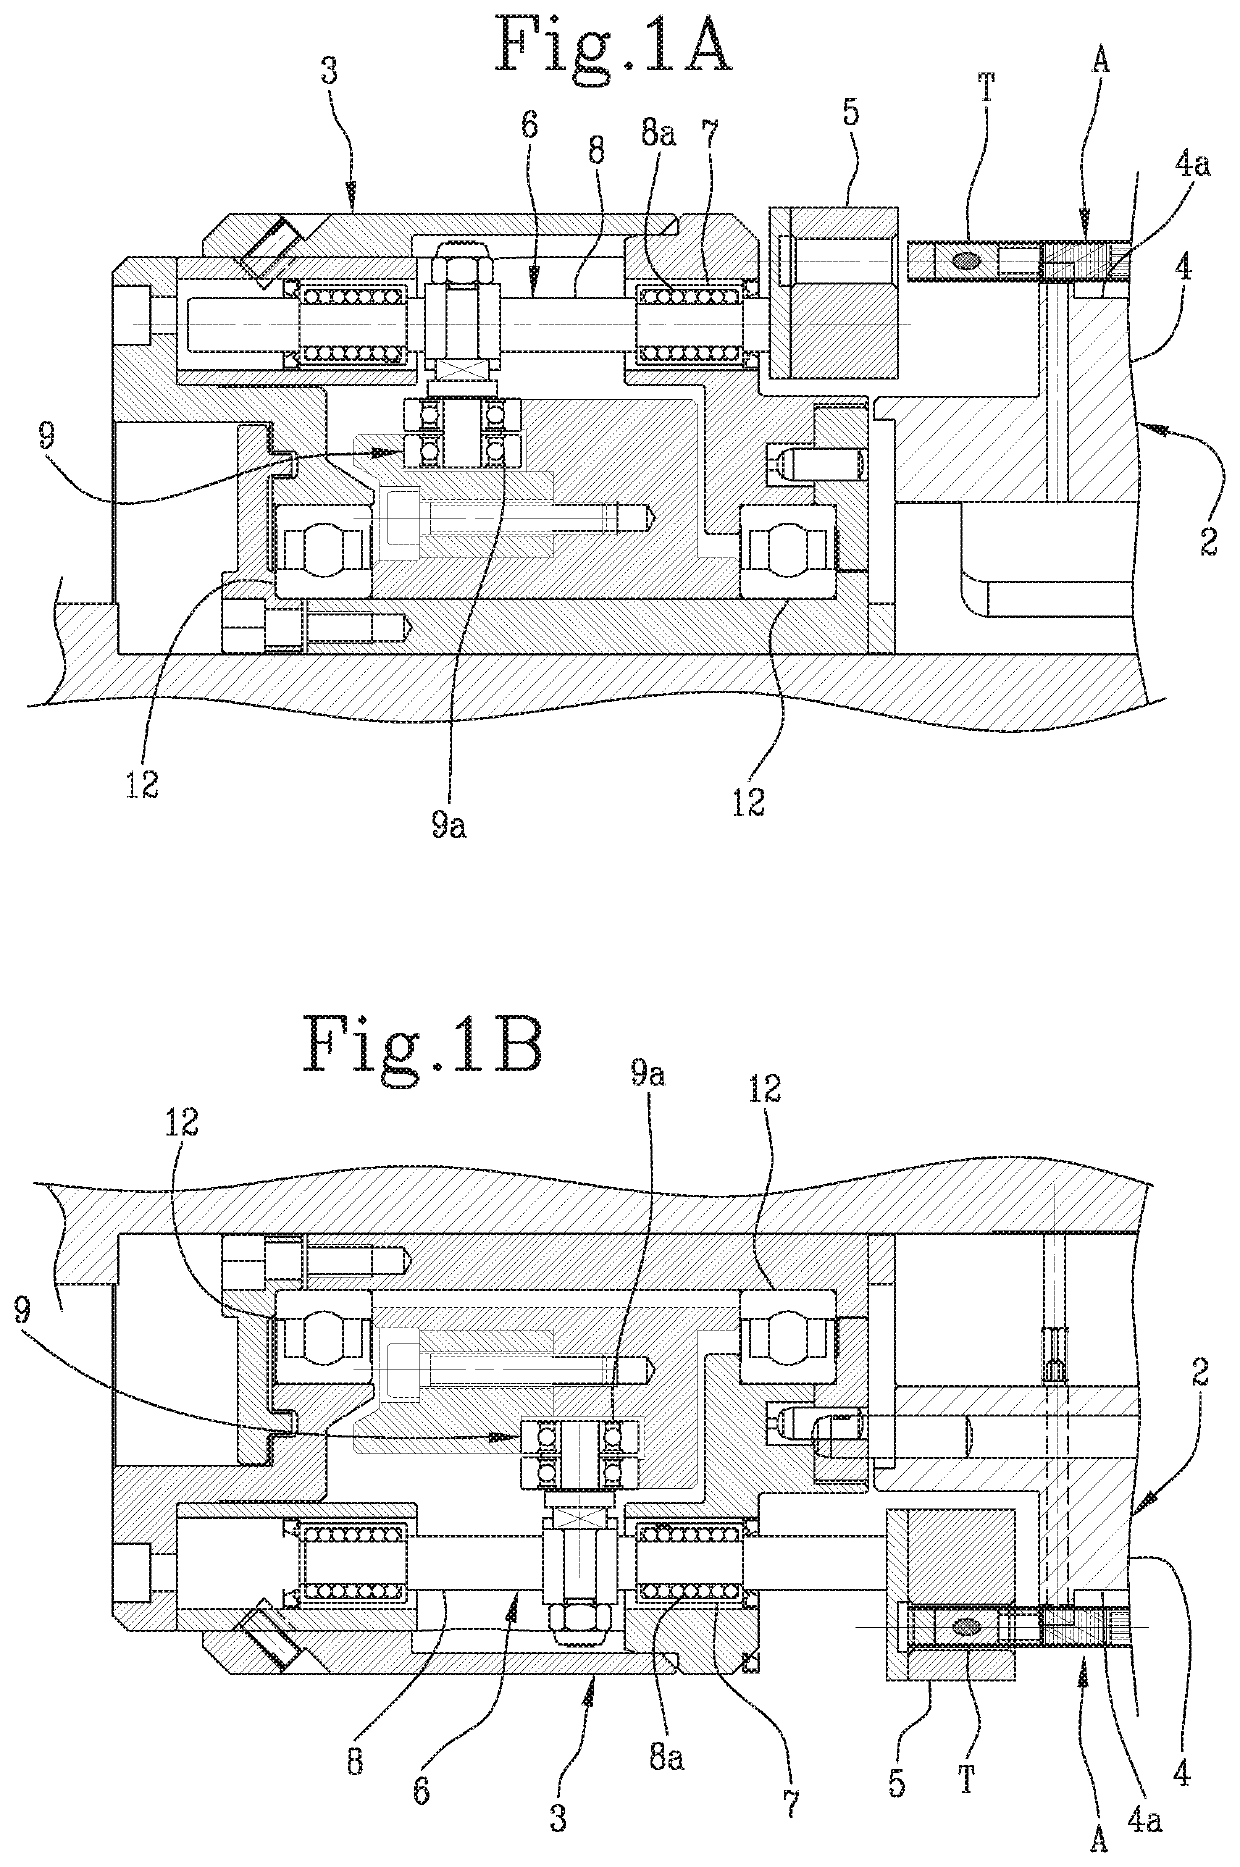 Device for inspecting smoking articles